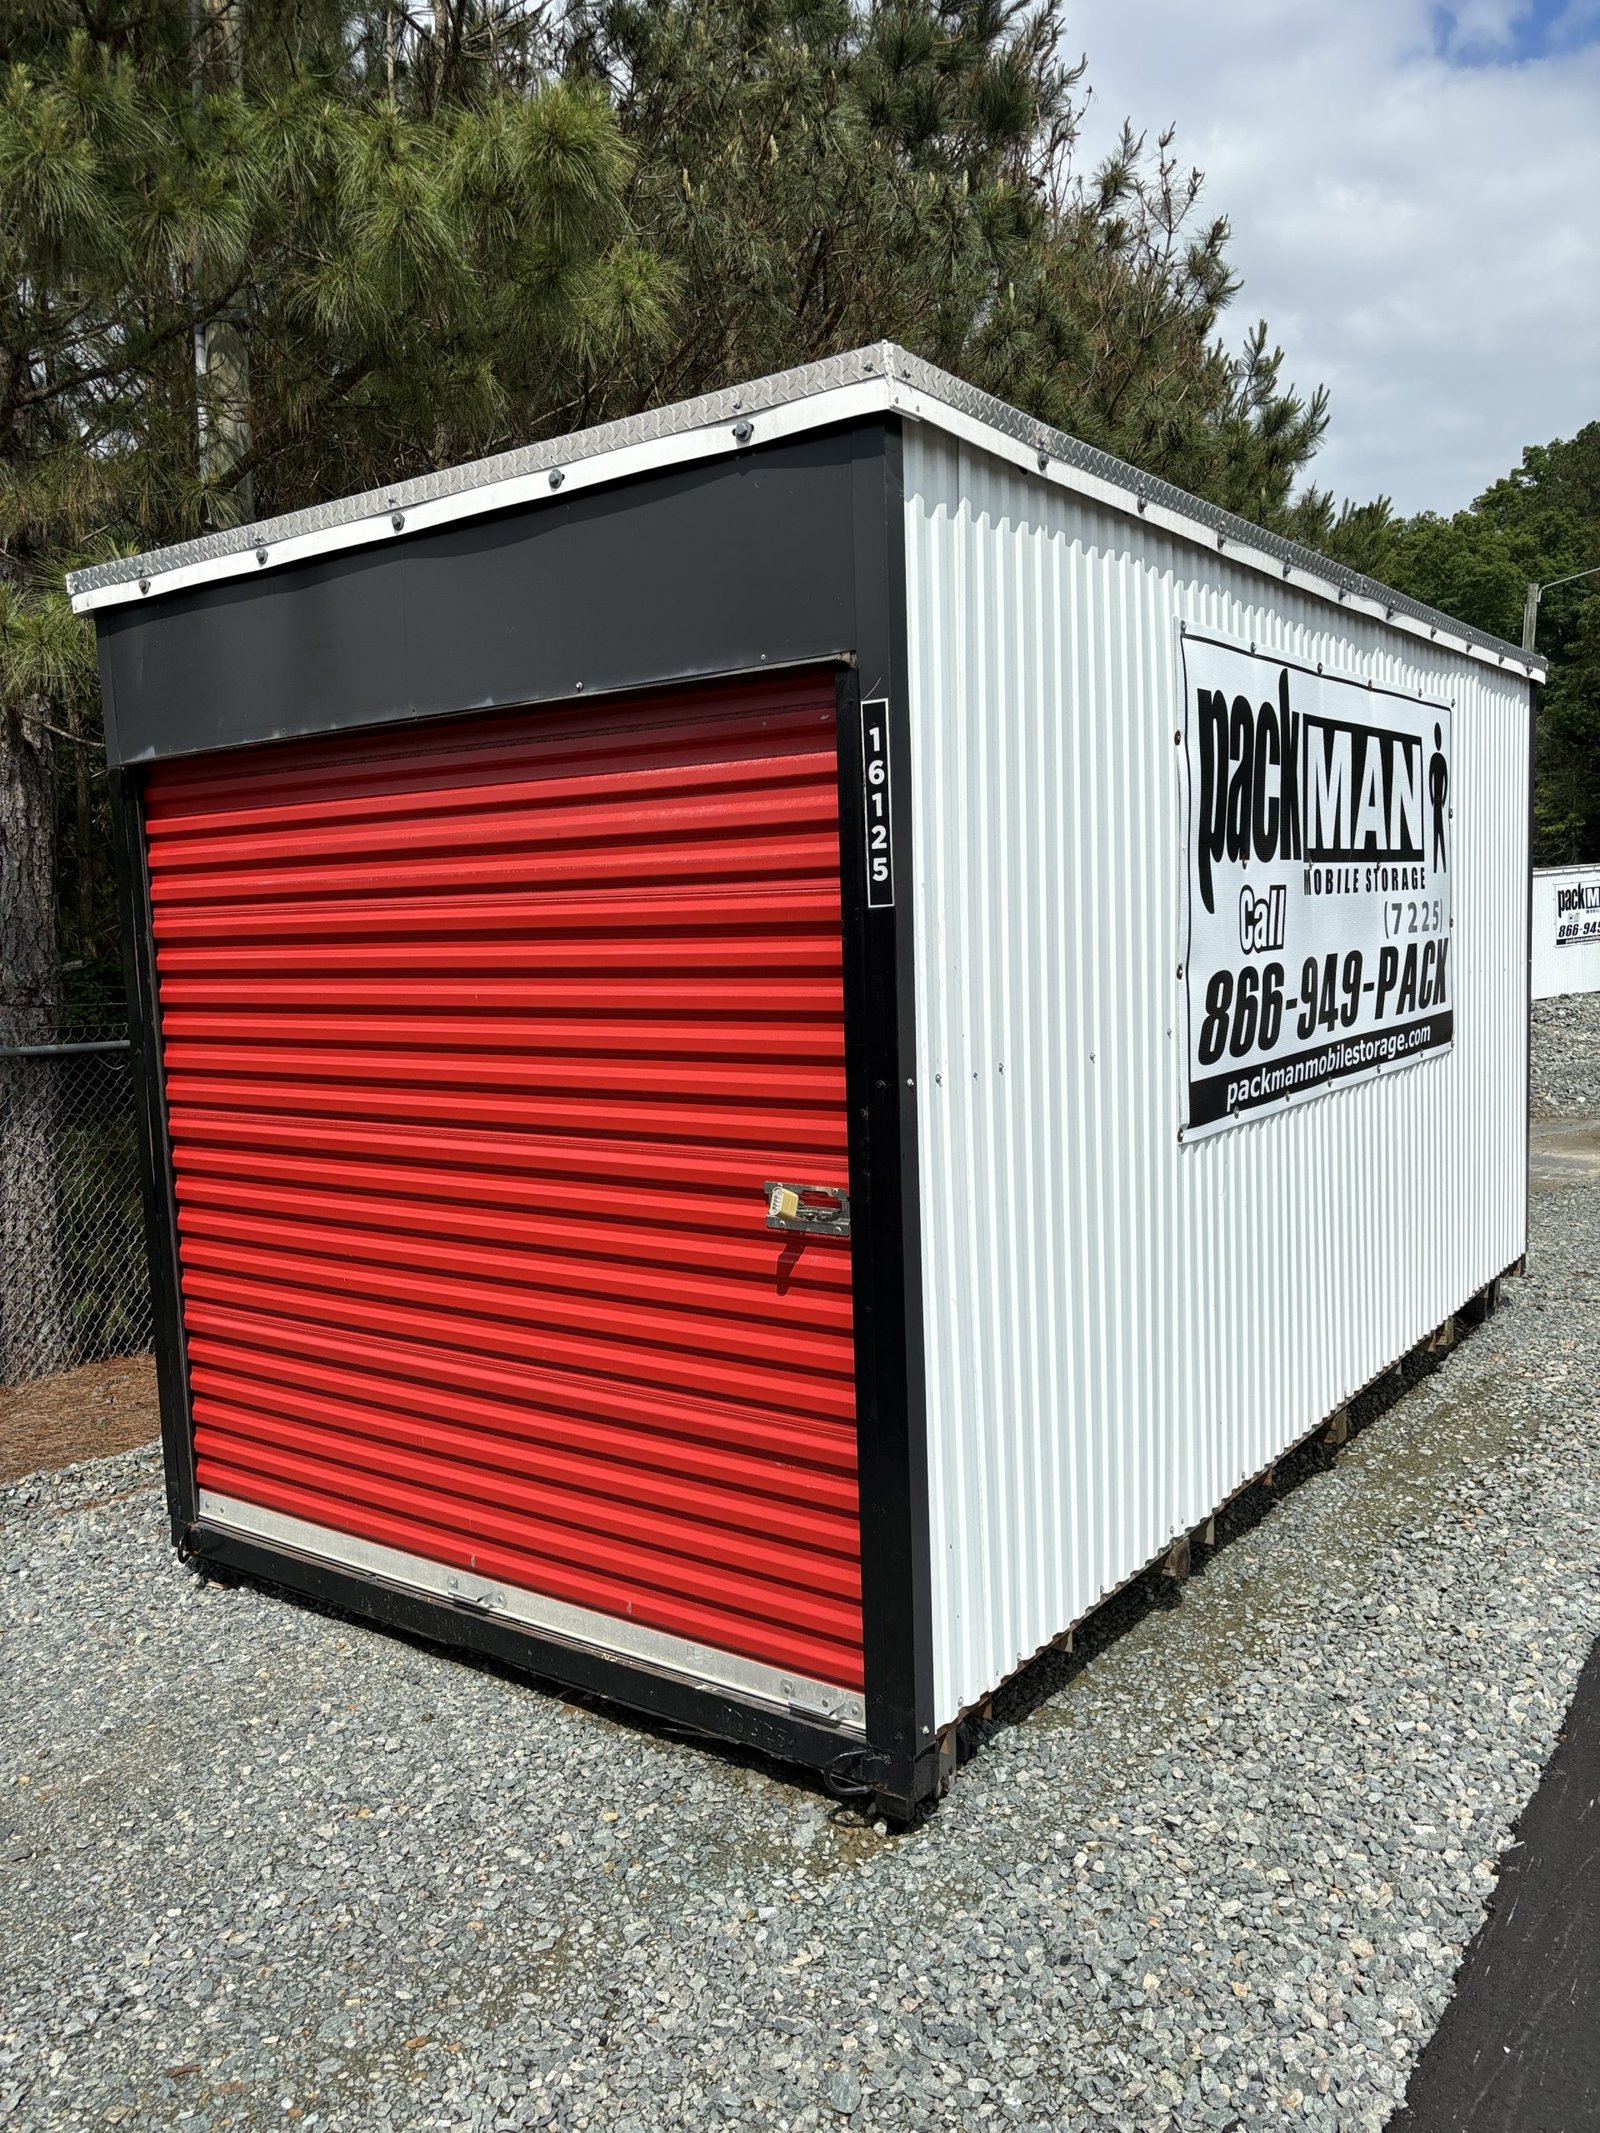 At Facility Packman Mobile Storage Unit